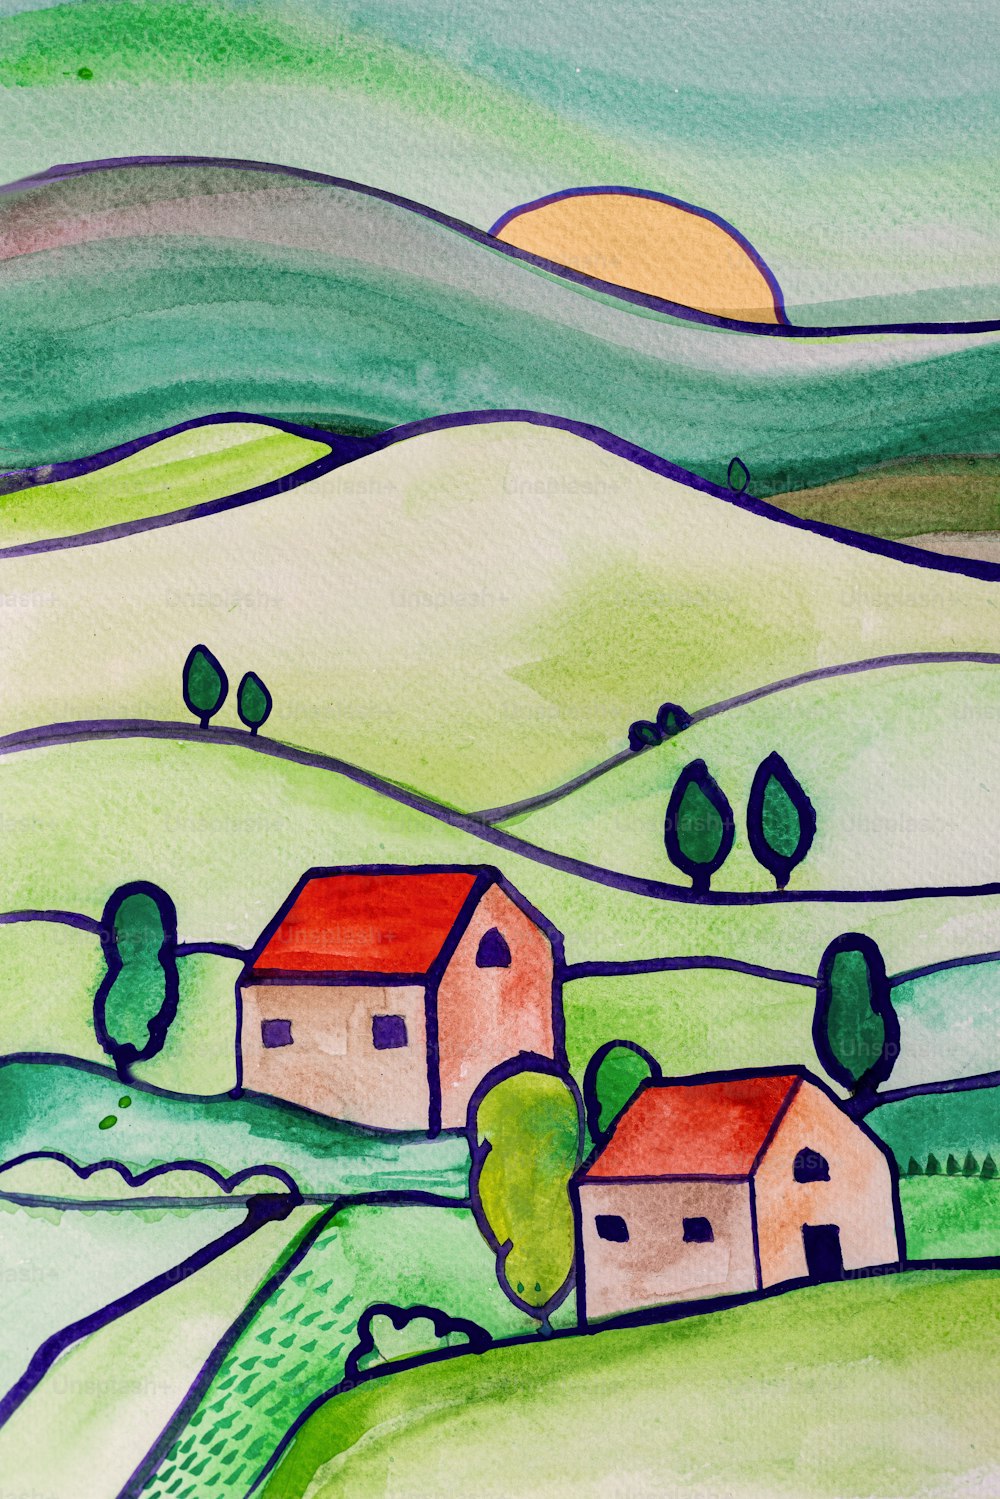 Magical scene of a village landscape in the style of water colors